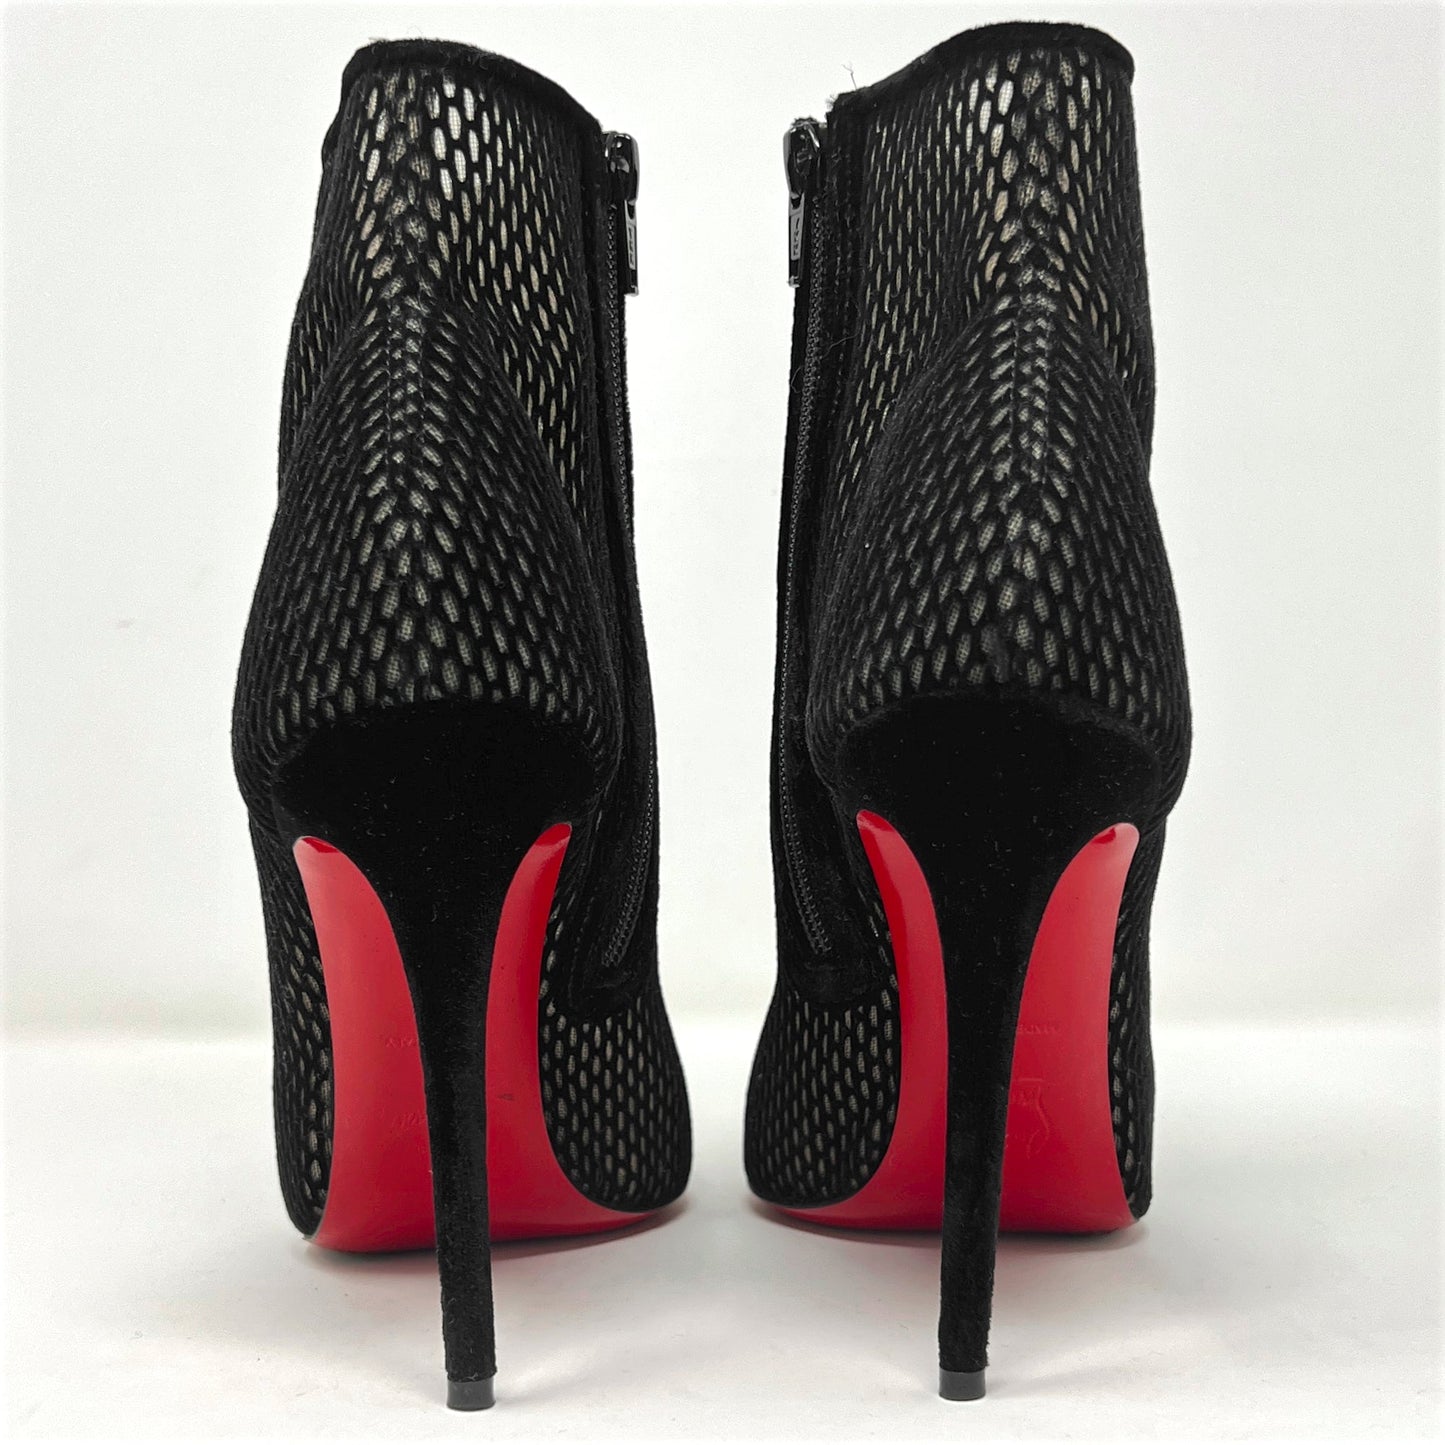 Christian Louboutin Gipsybootie Black Suede Velvet Pointed Toe Ankle Boots Heels Size EU 39